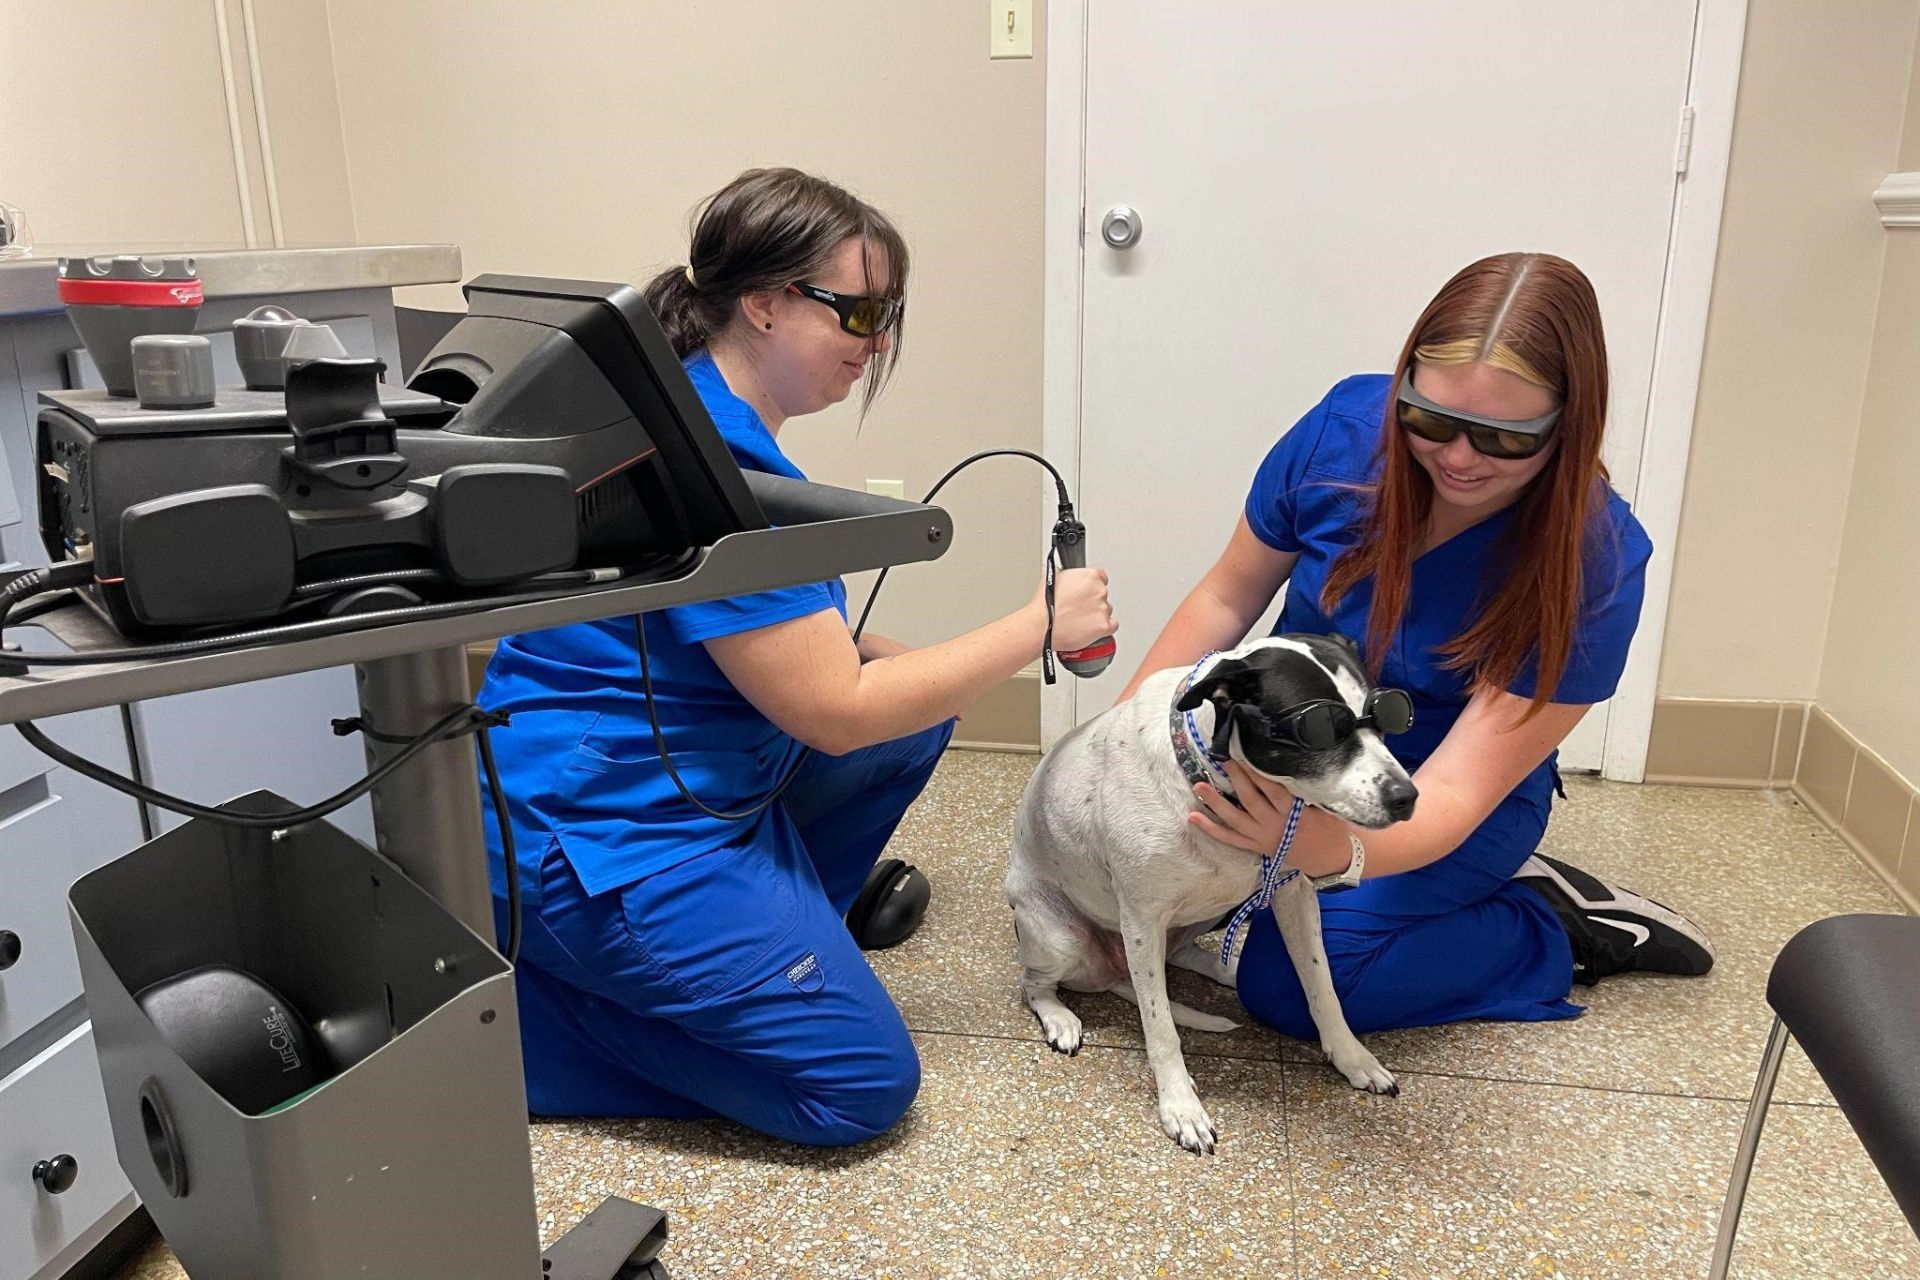 two women wearing goggles and blue scrubs holding a dog